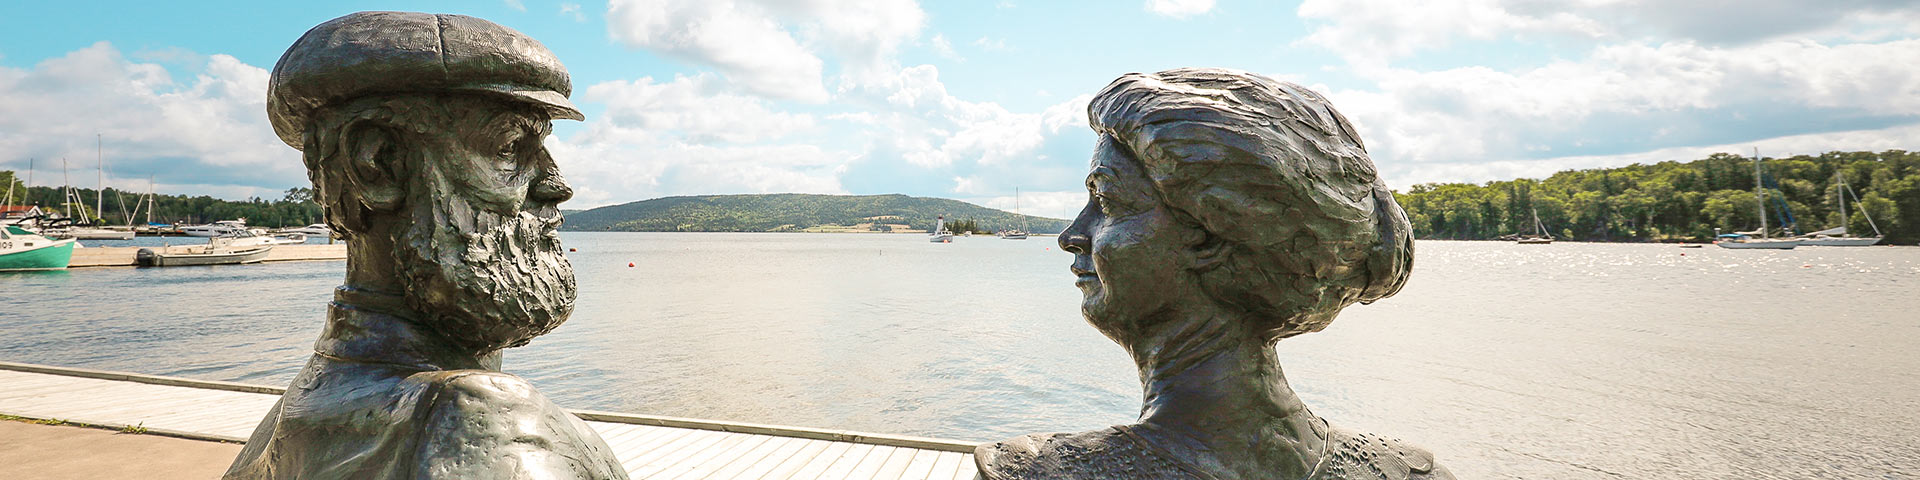 Statues of Alec and Mabel Bell with Baddeck Bay in the background